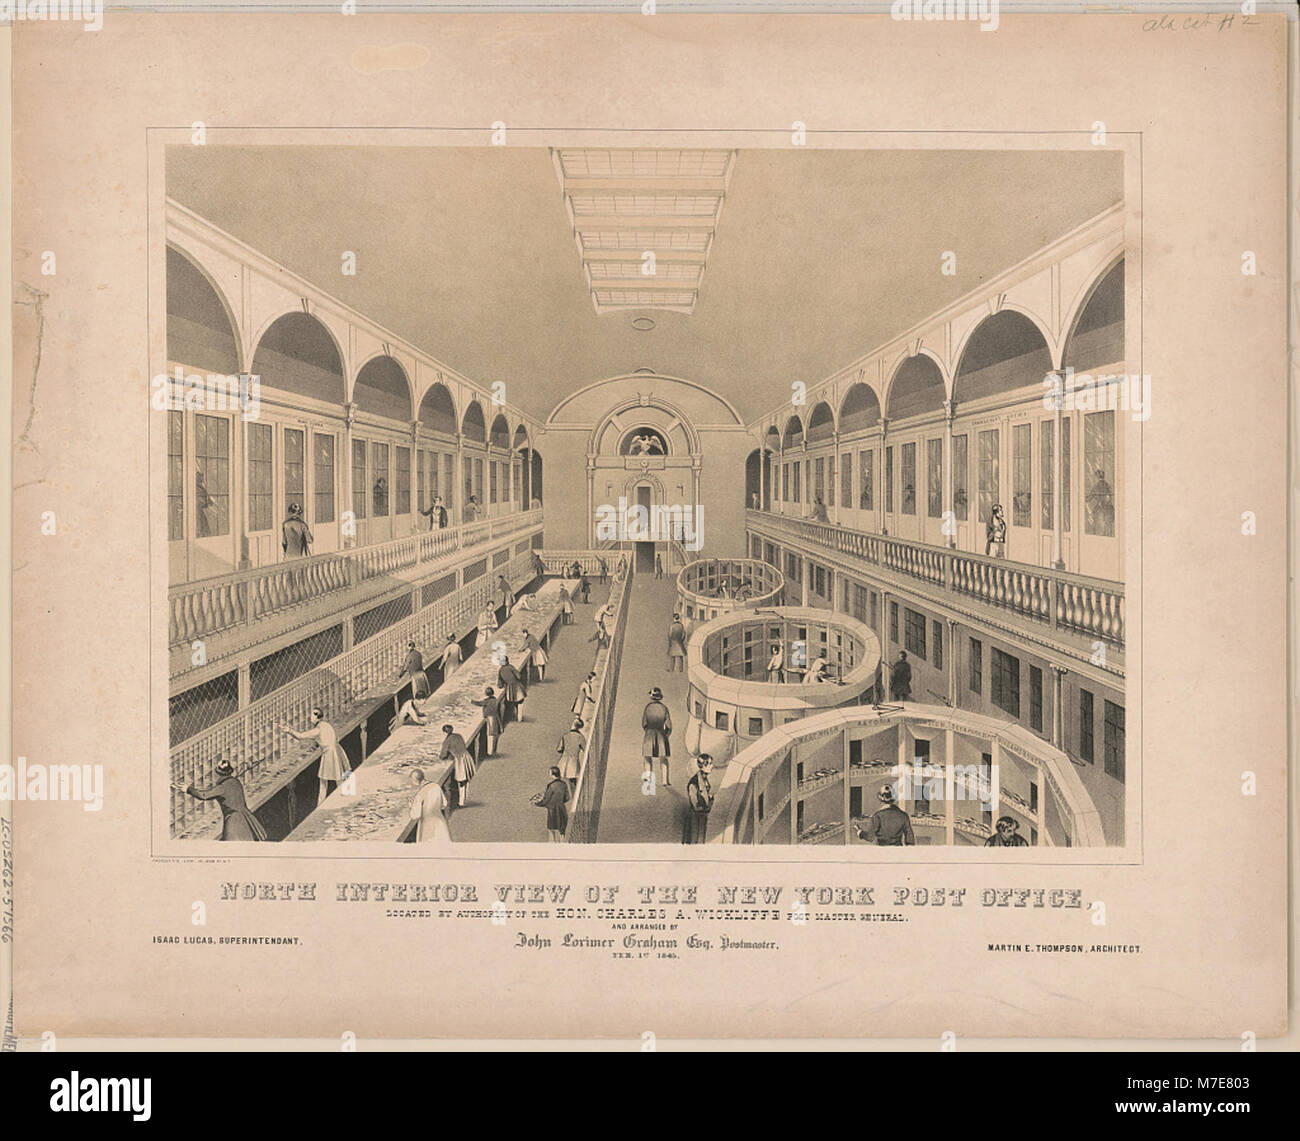 North interior view of the New York post office, located by authority of the Hon. Charles A. Wickliffe Post Master General and arranged by John Lorimer Graham Esq. Postmaster, Feb. 1st 1845 LCCN2003664205 Stock Photo